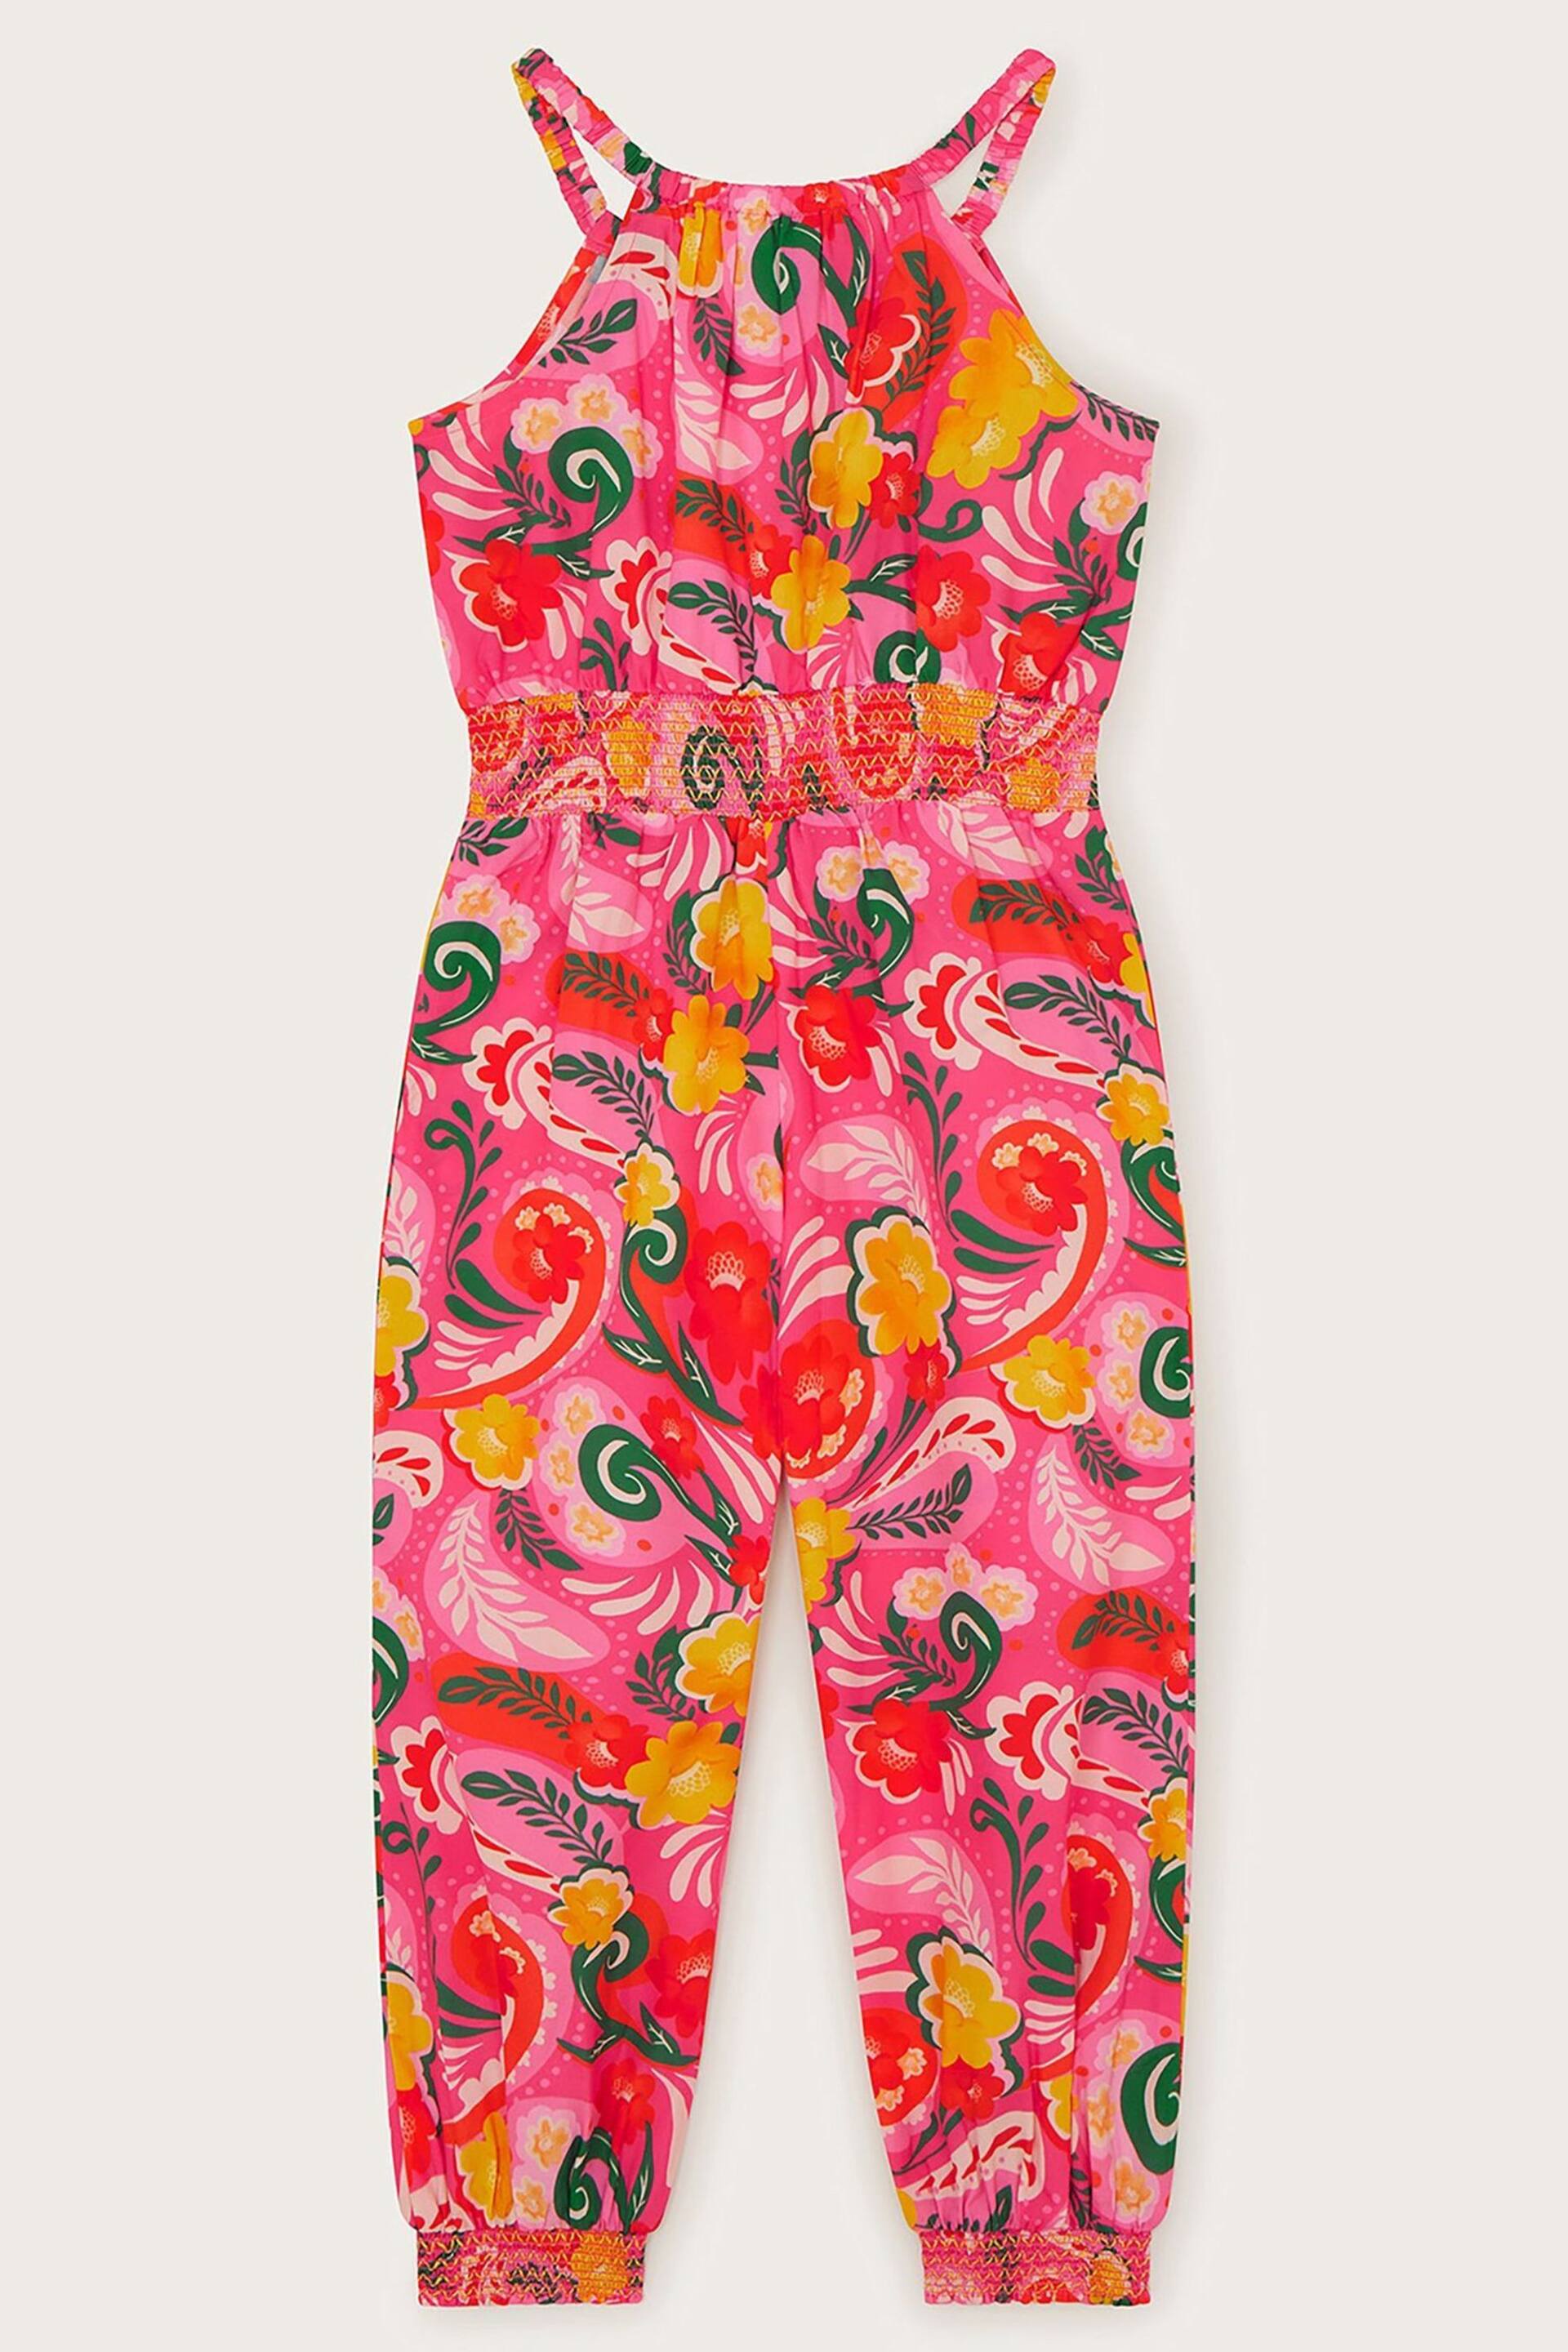 Monsoon Pink Floral Swirl Jumpsuit - Image 3 of 4